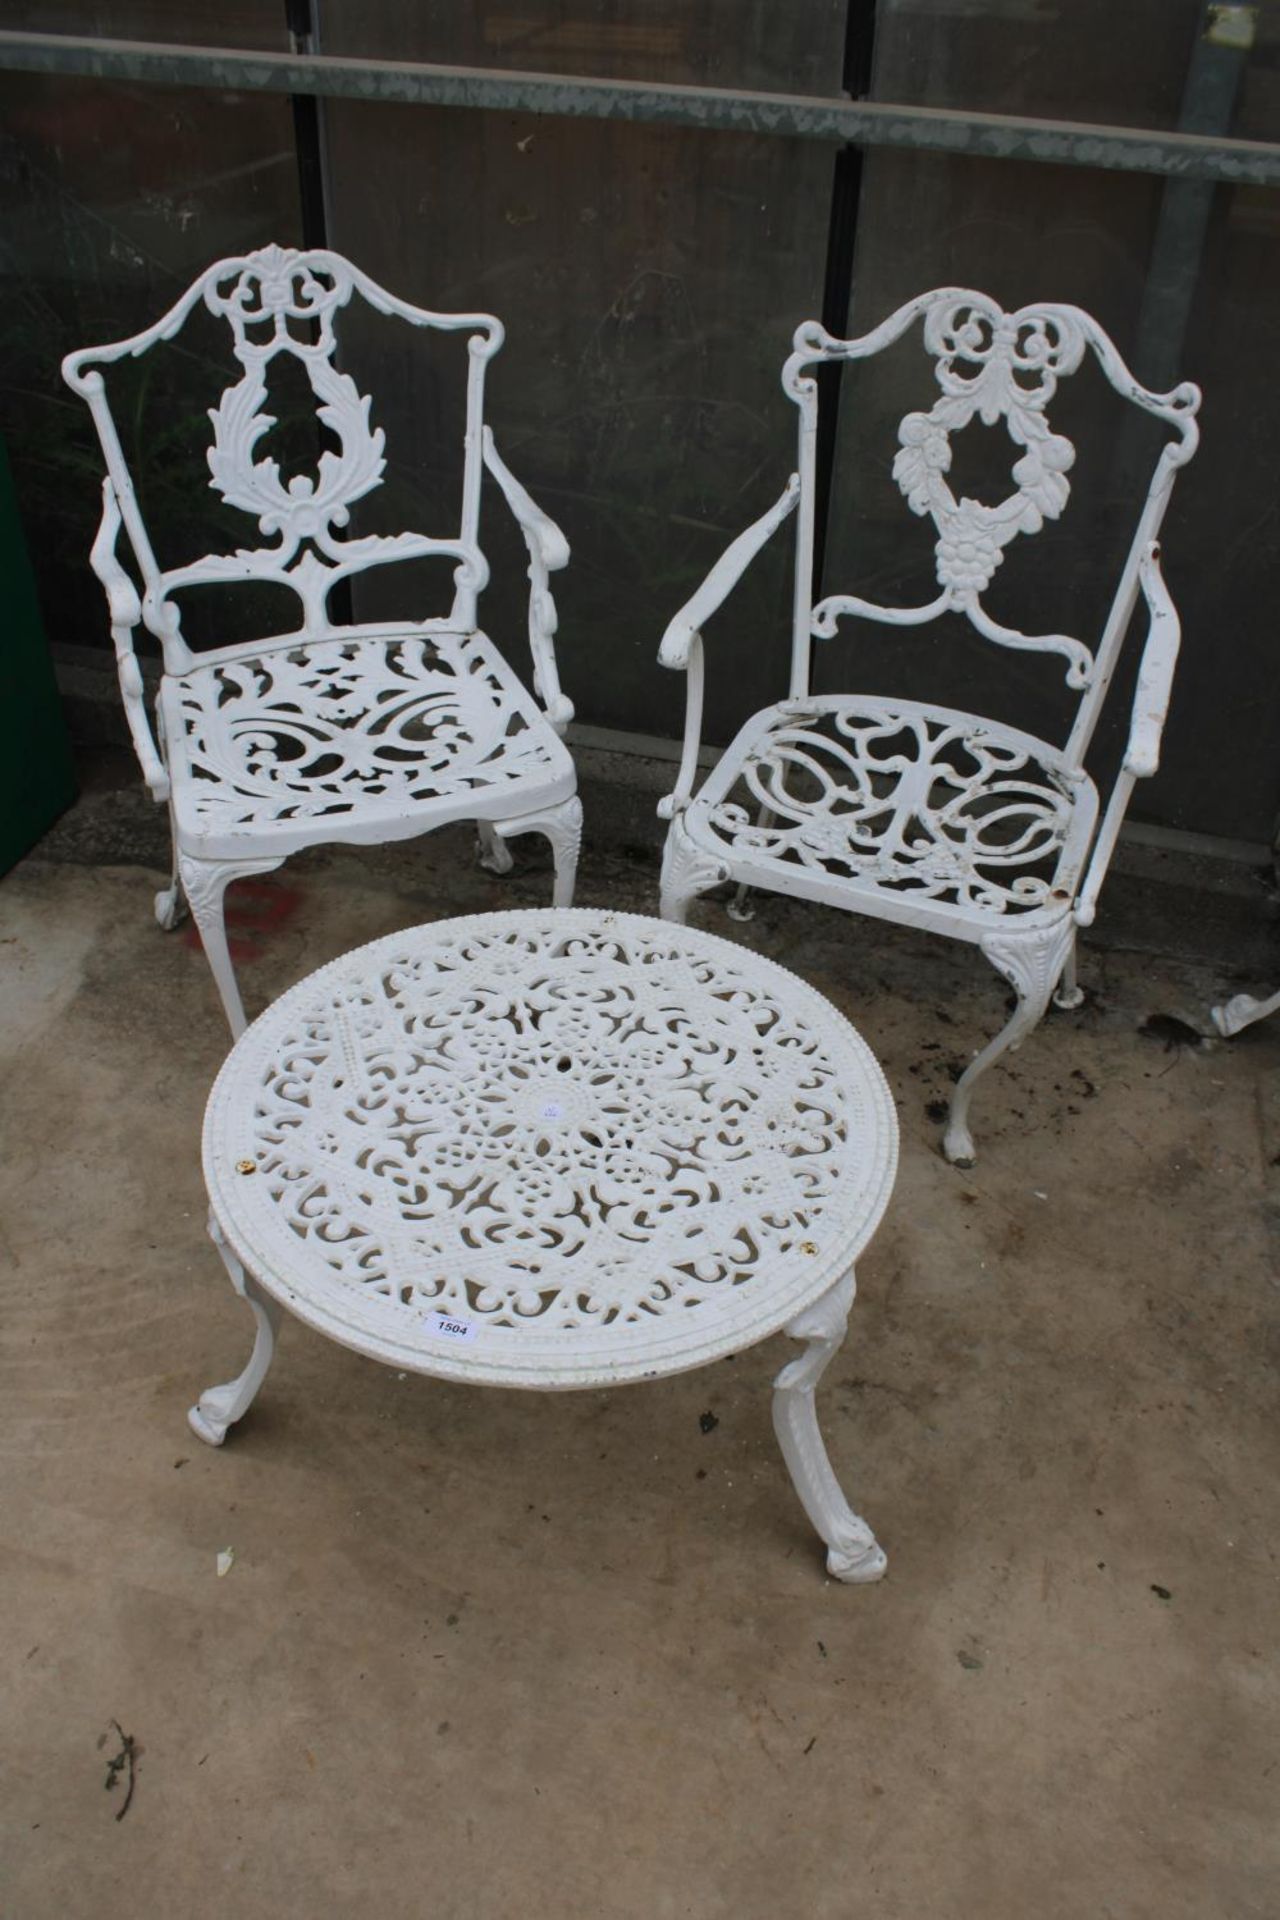 A VINTAGE CAST ALLOY BISTRO SET COMPRISING OF A ROUND TABLE AND FOUR CHAIRS - Image 5 of 6